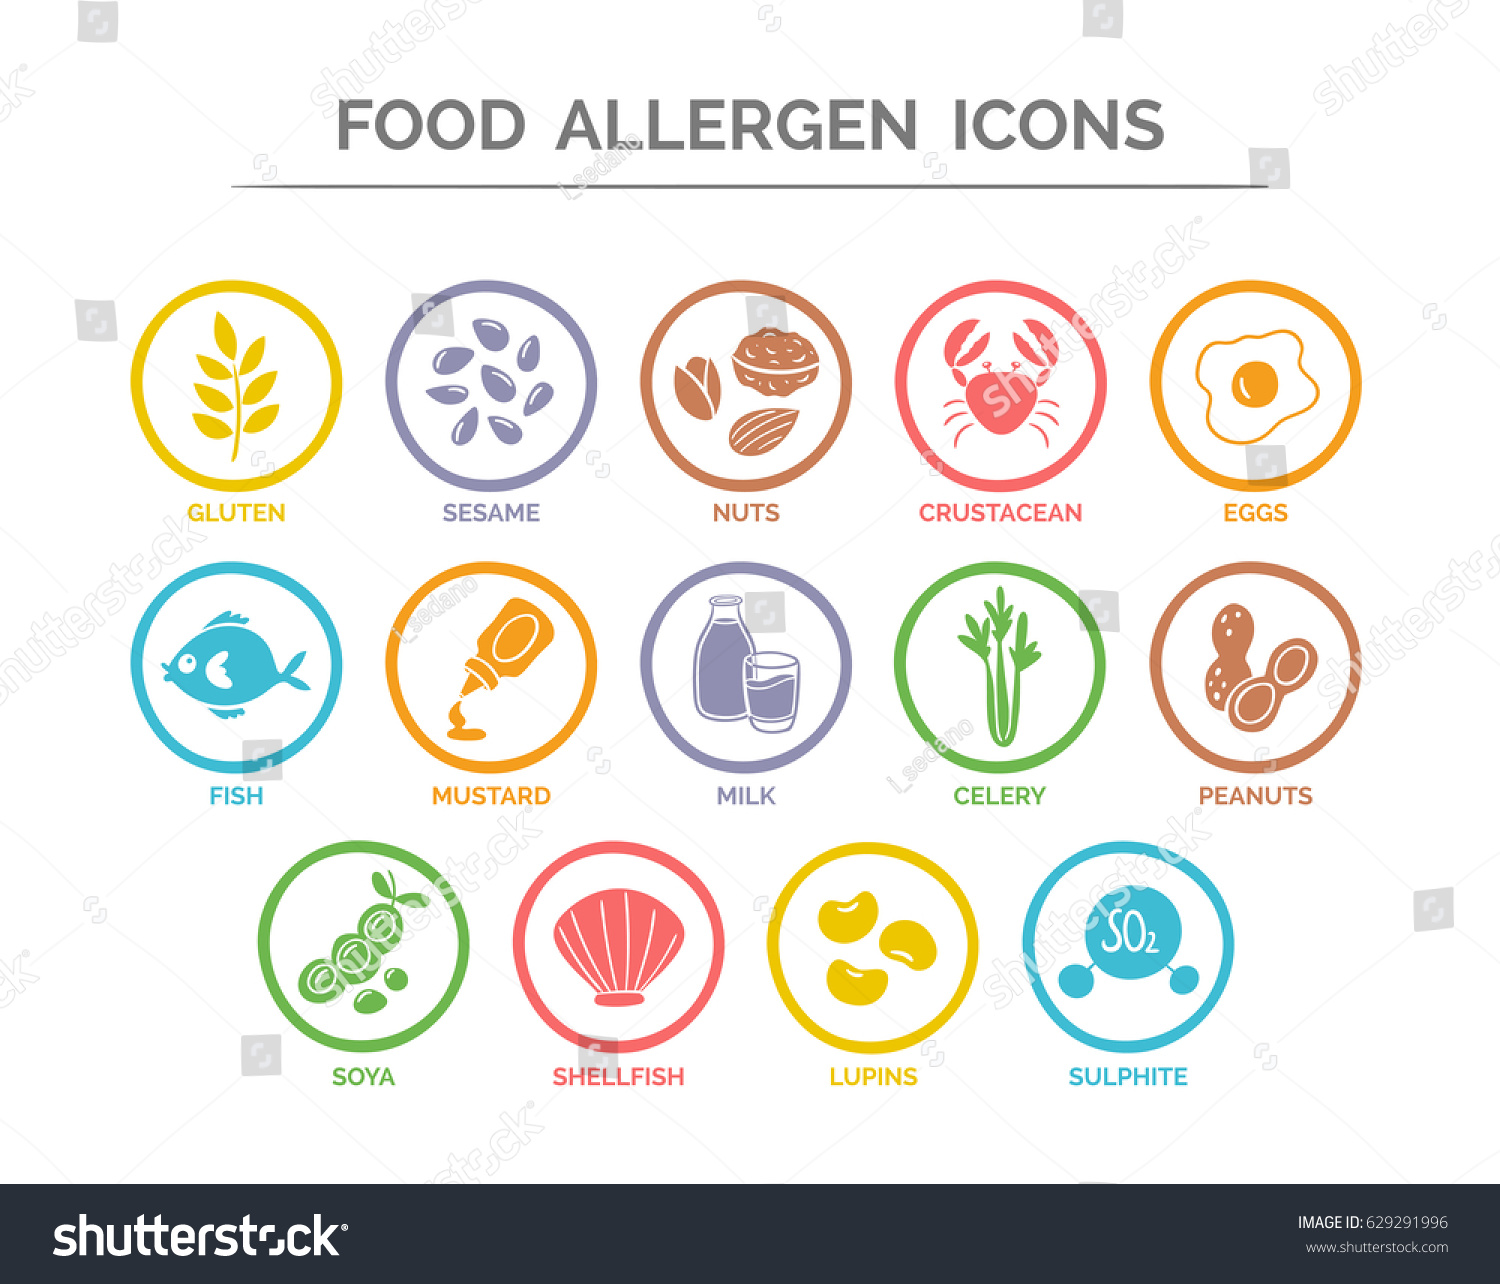 SVG of Food allergen icon set. 14 food ingredients that must be declared as allergens in the EU. Useful for restaurants and meals. Colorful silhouette version. svg